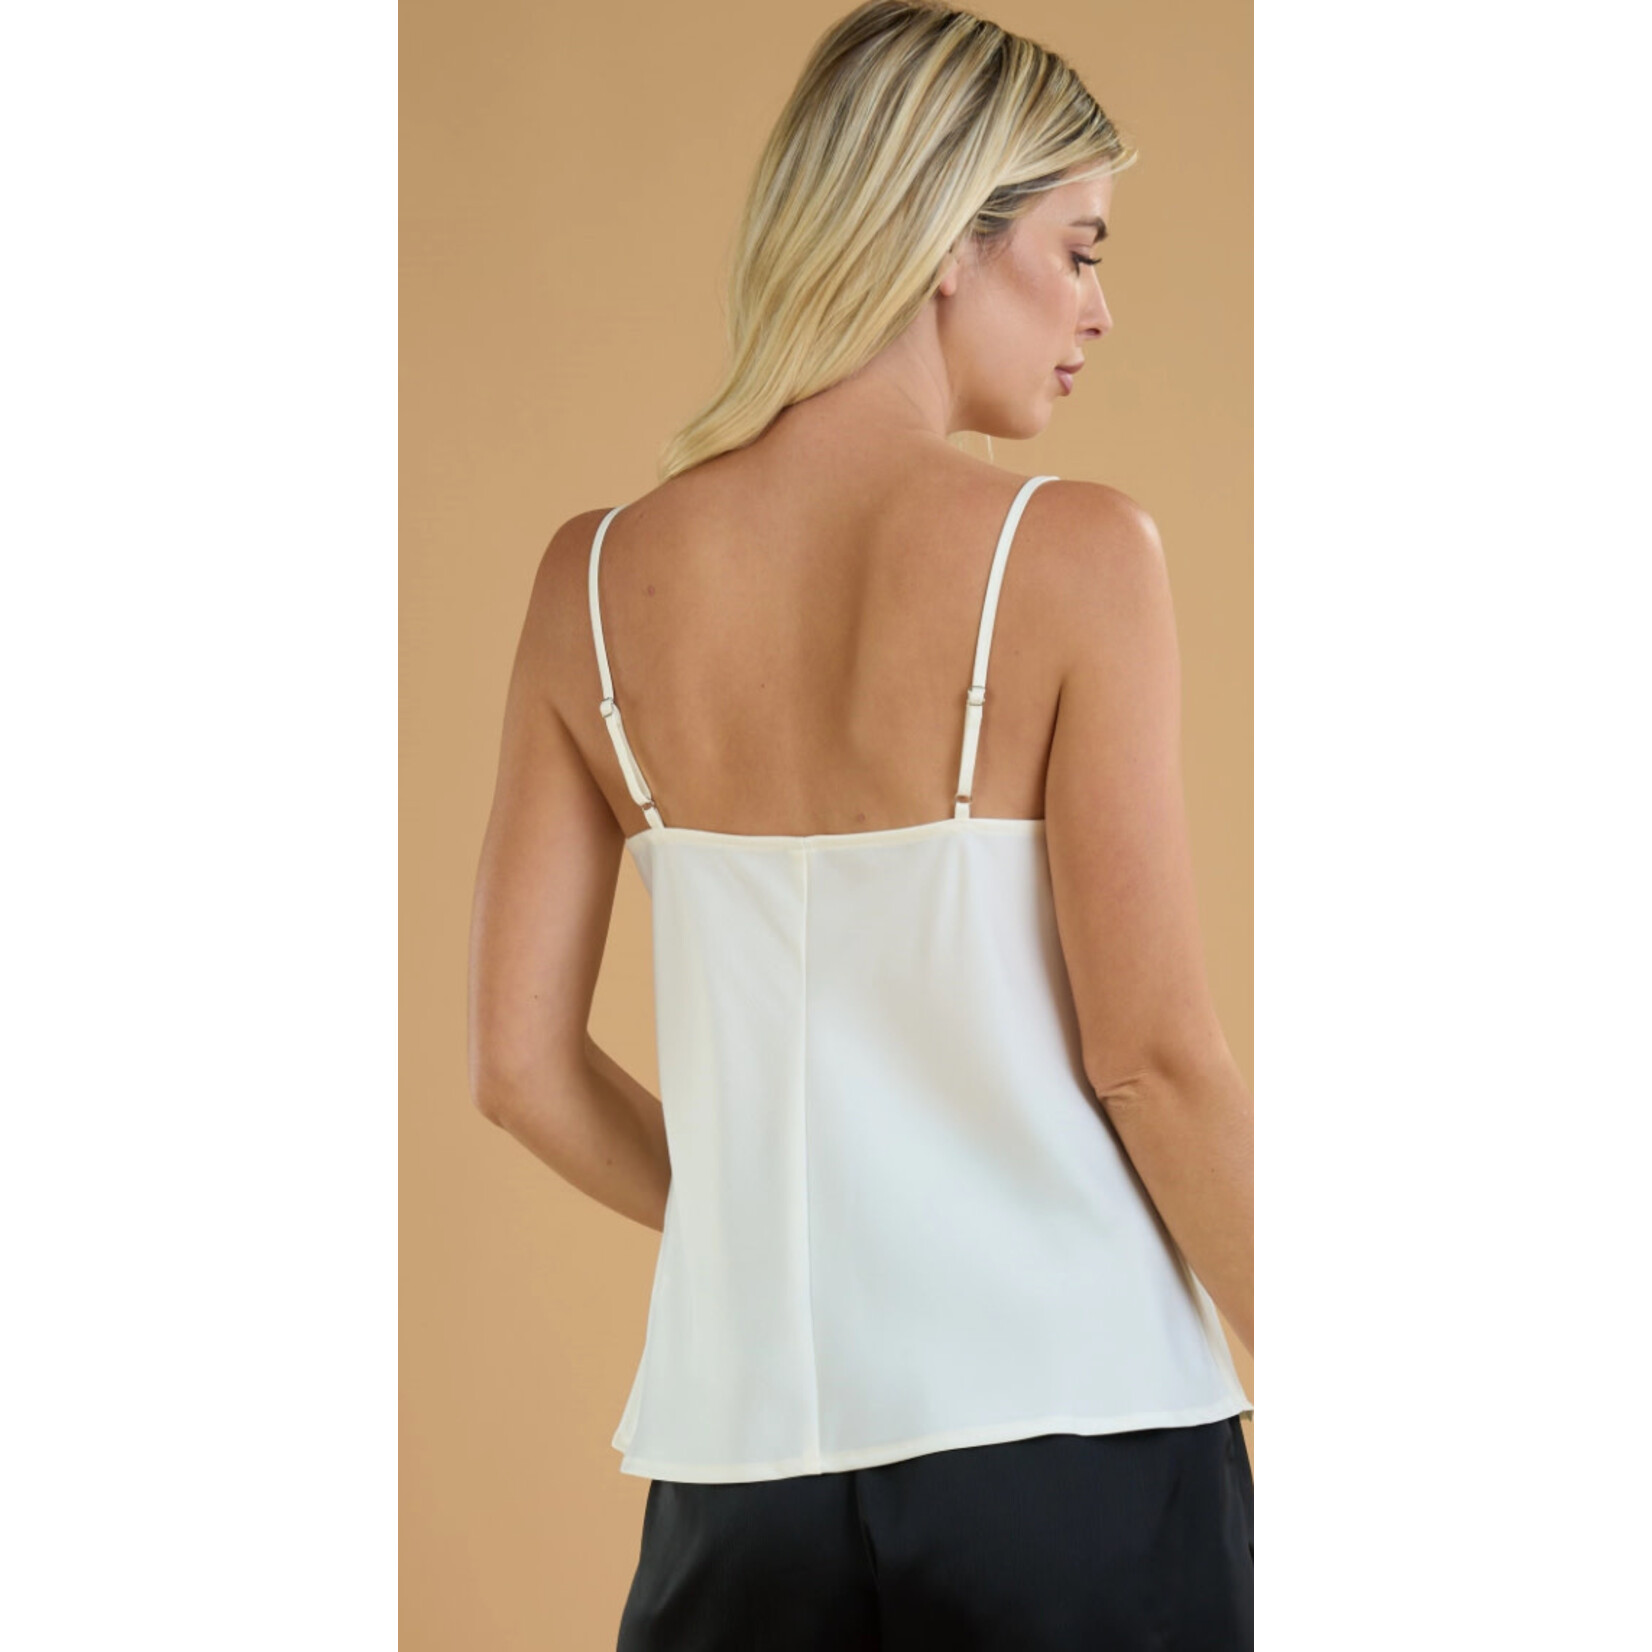 The Shelley Top